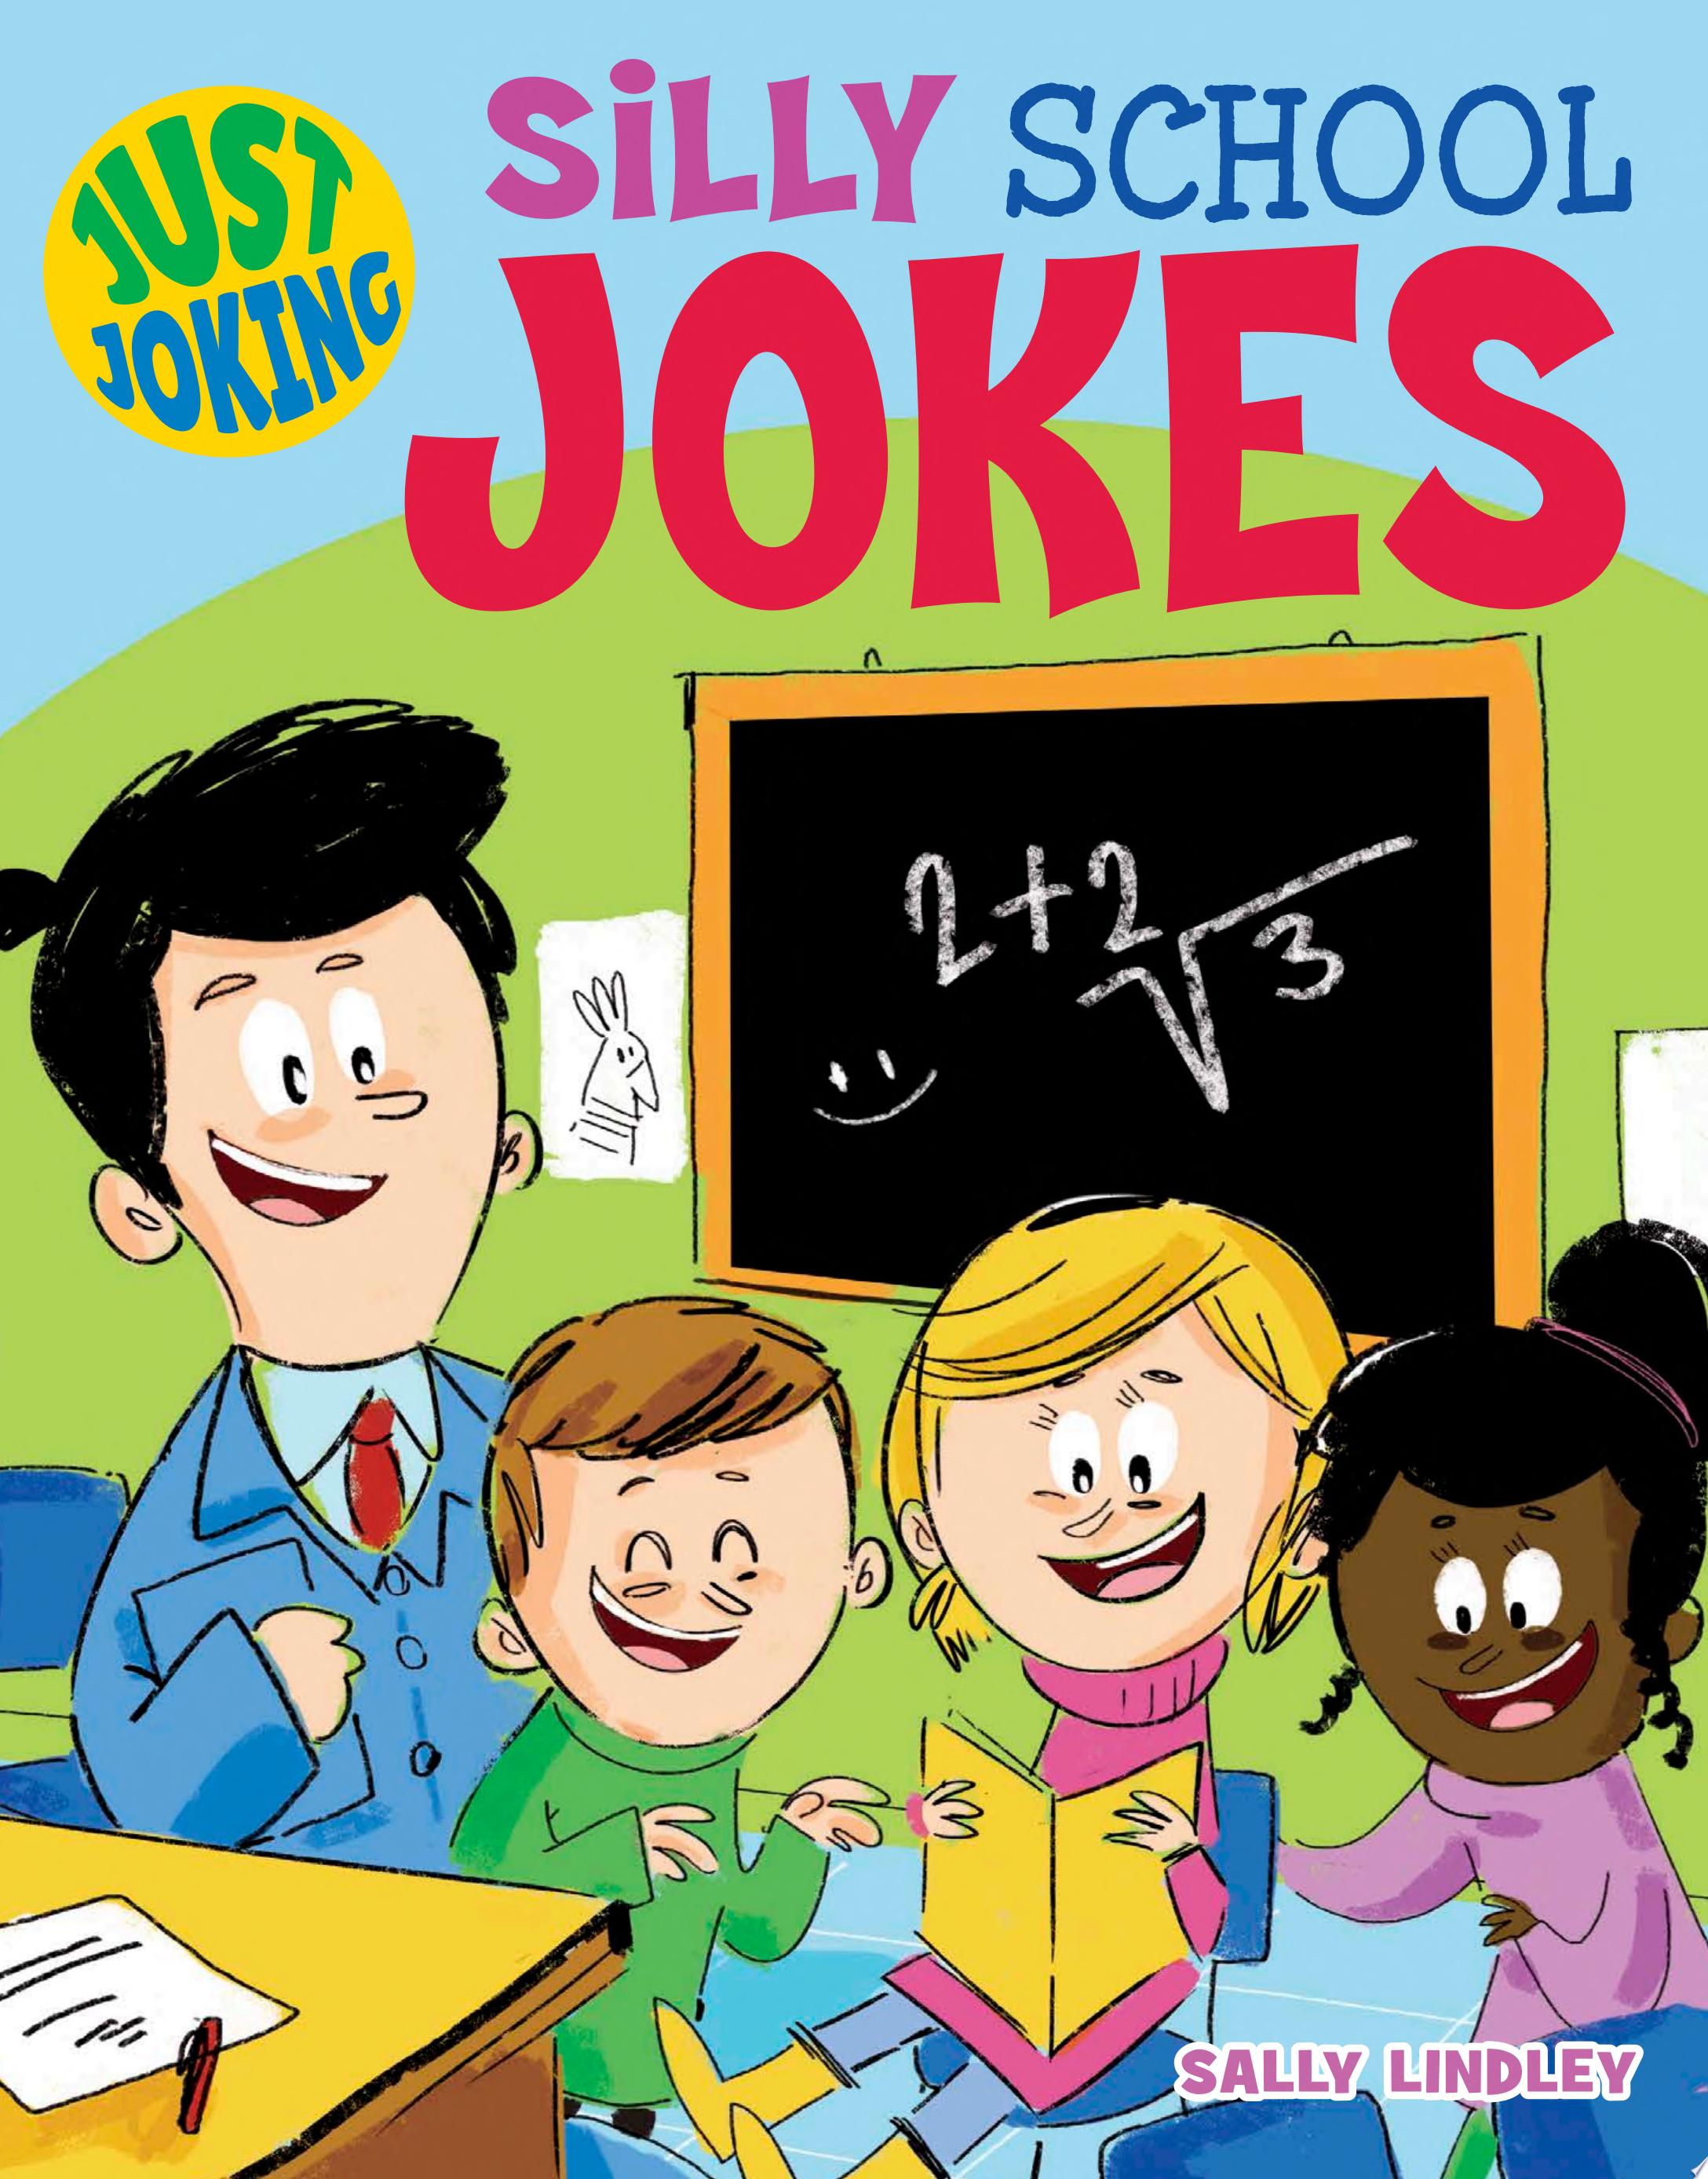 Image for "Silly School Jokes"